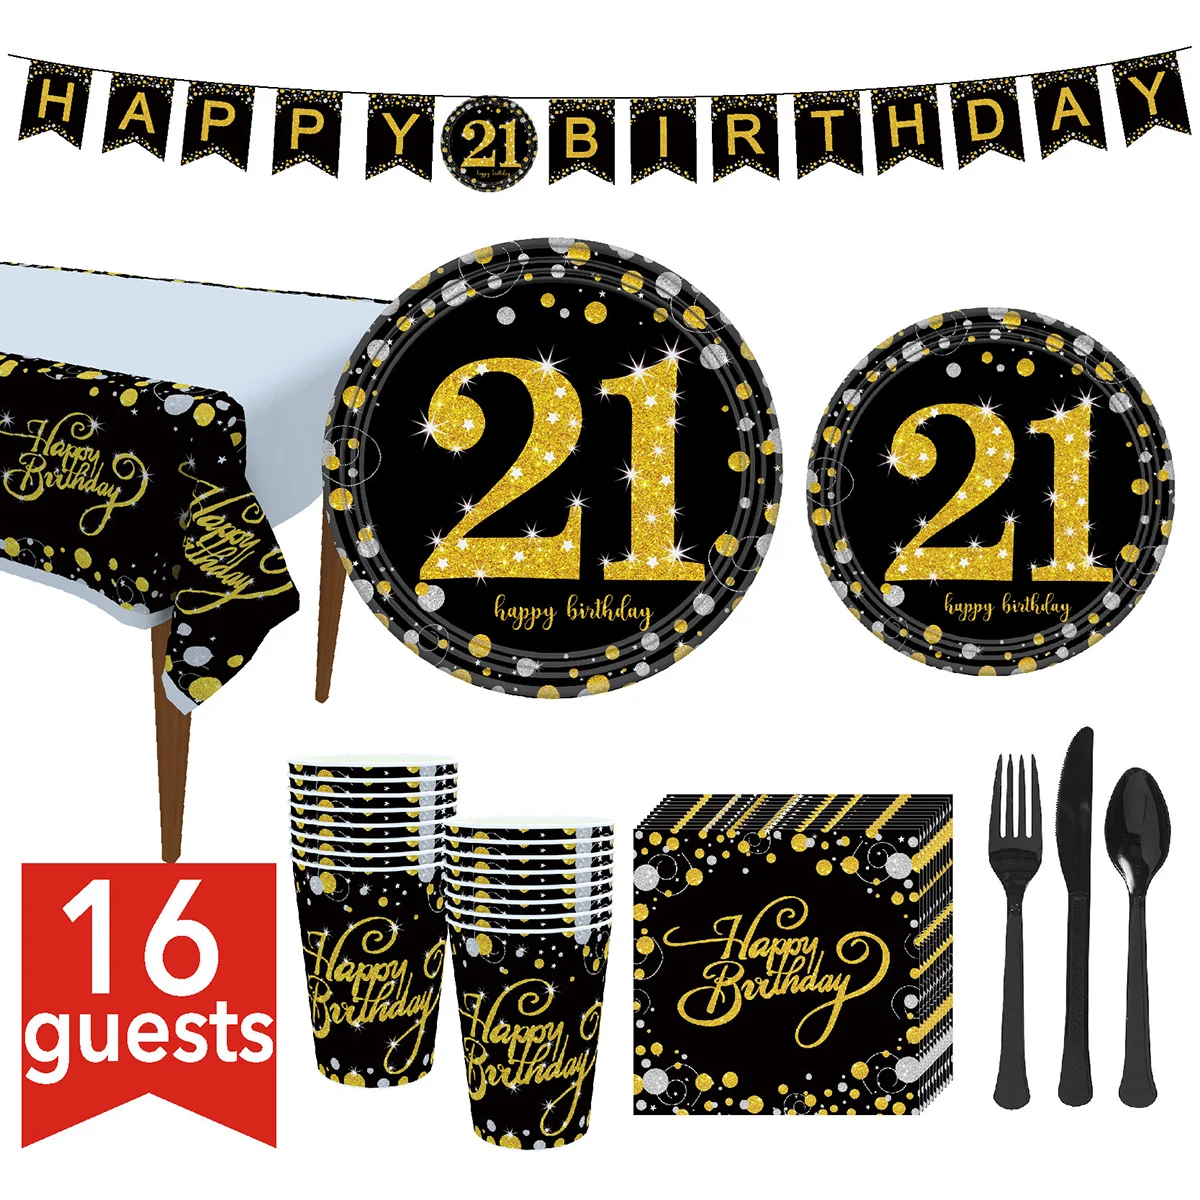 

21st Birthday Party Supplies Tableware Set Plates Cups Napkins Banner Tablecloth Fork Knife Spoon, Serves 16